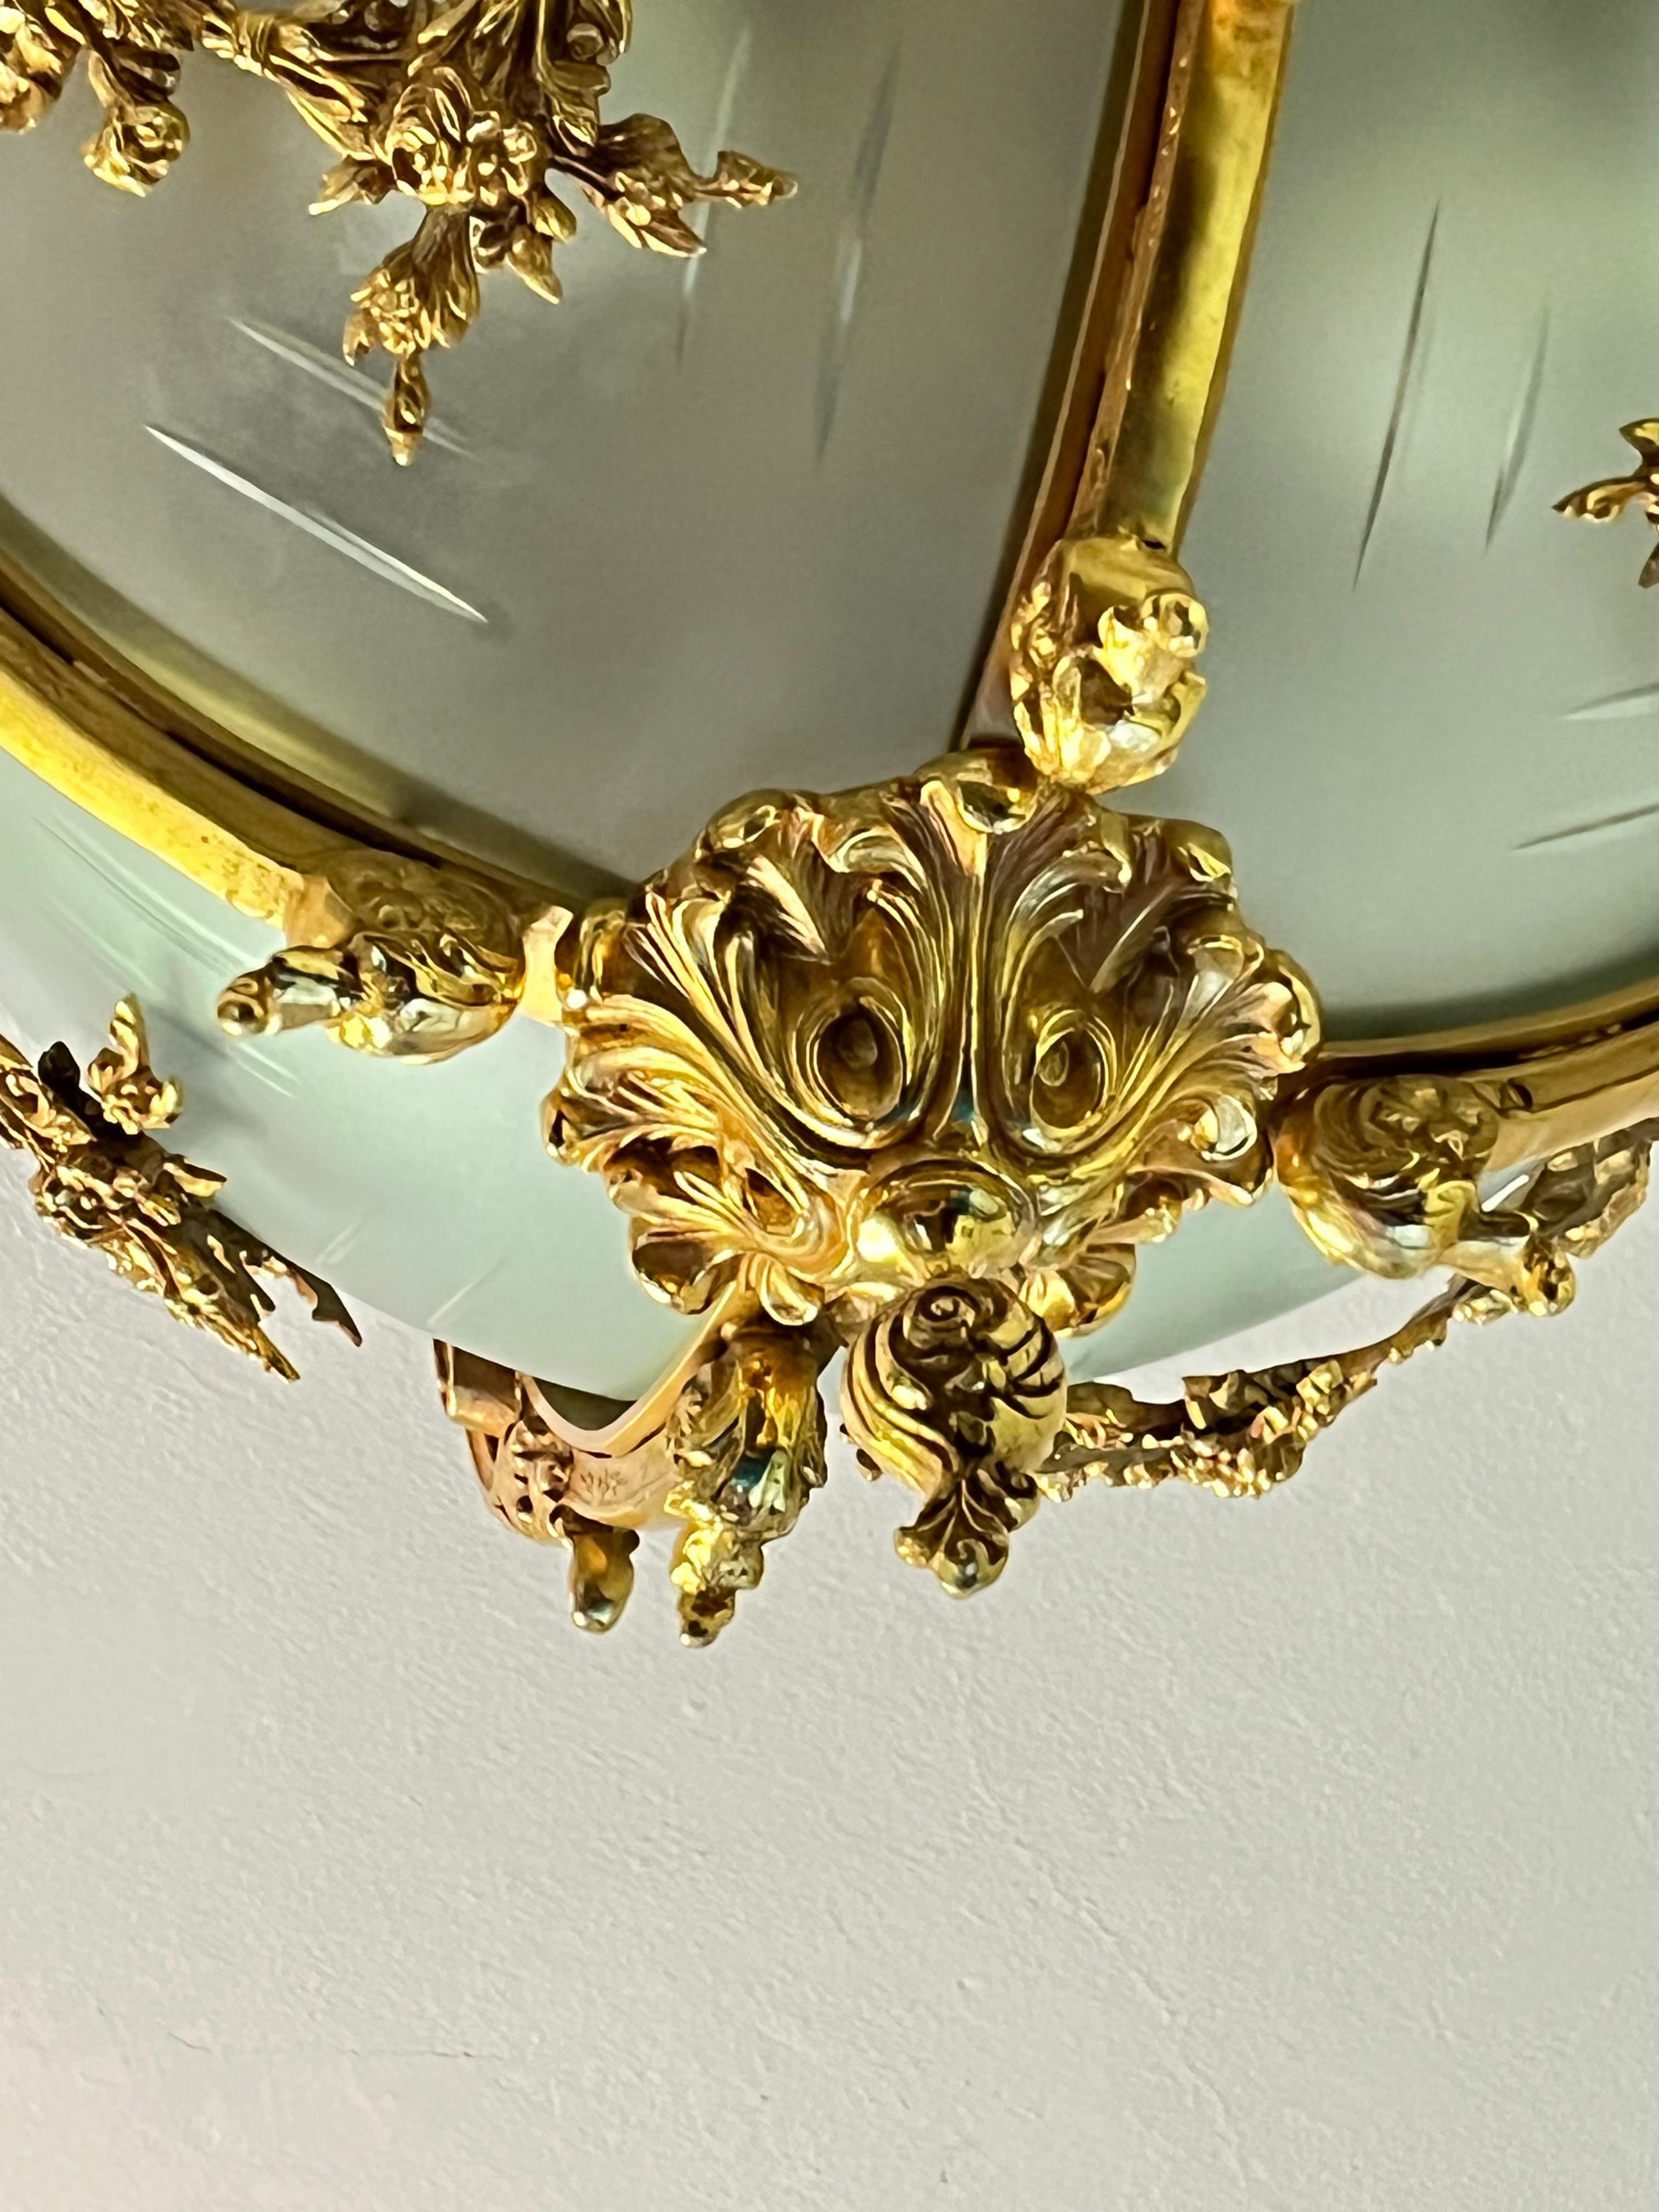 4-light glass and brass ceiling light, Italy, 1980s
Found in a noble apartment. It is intact and functioning.
E 27 lamps.